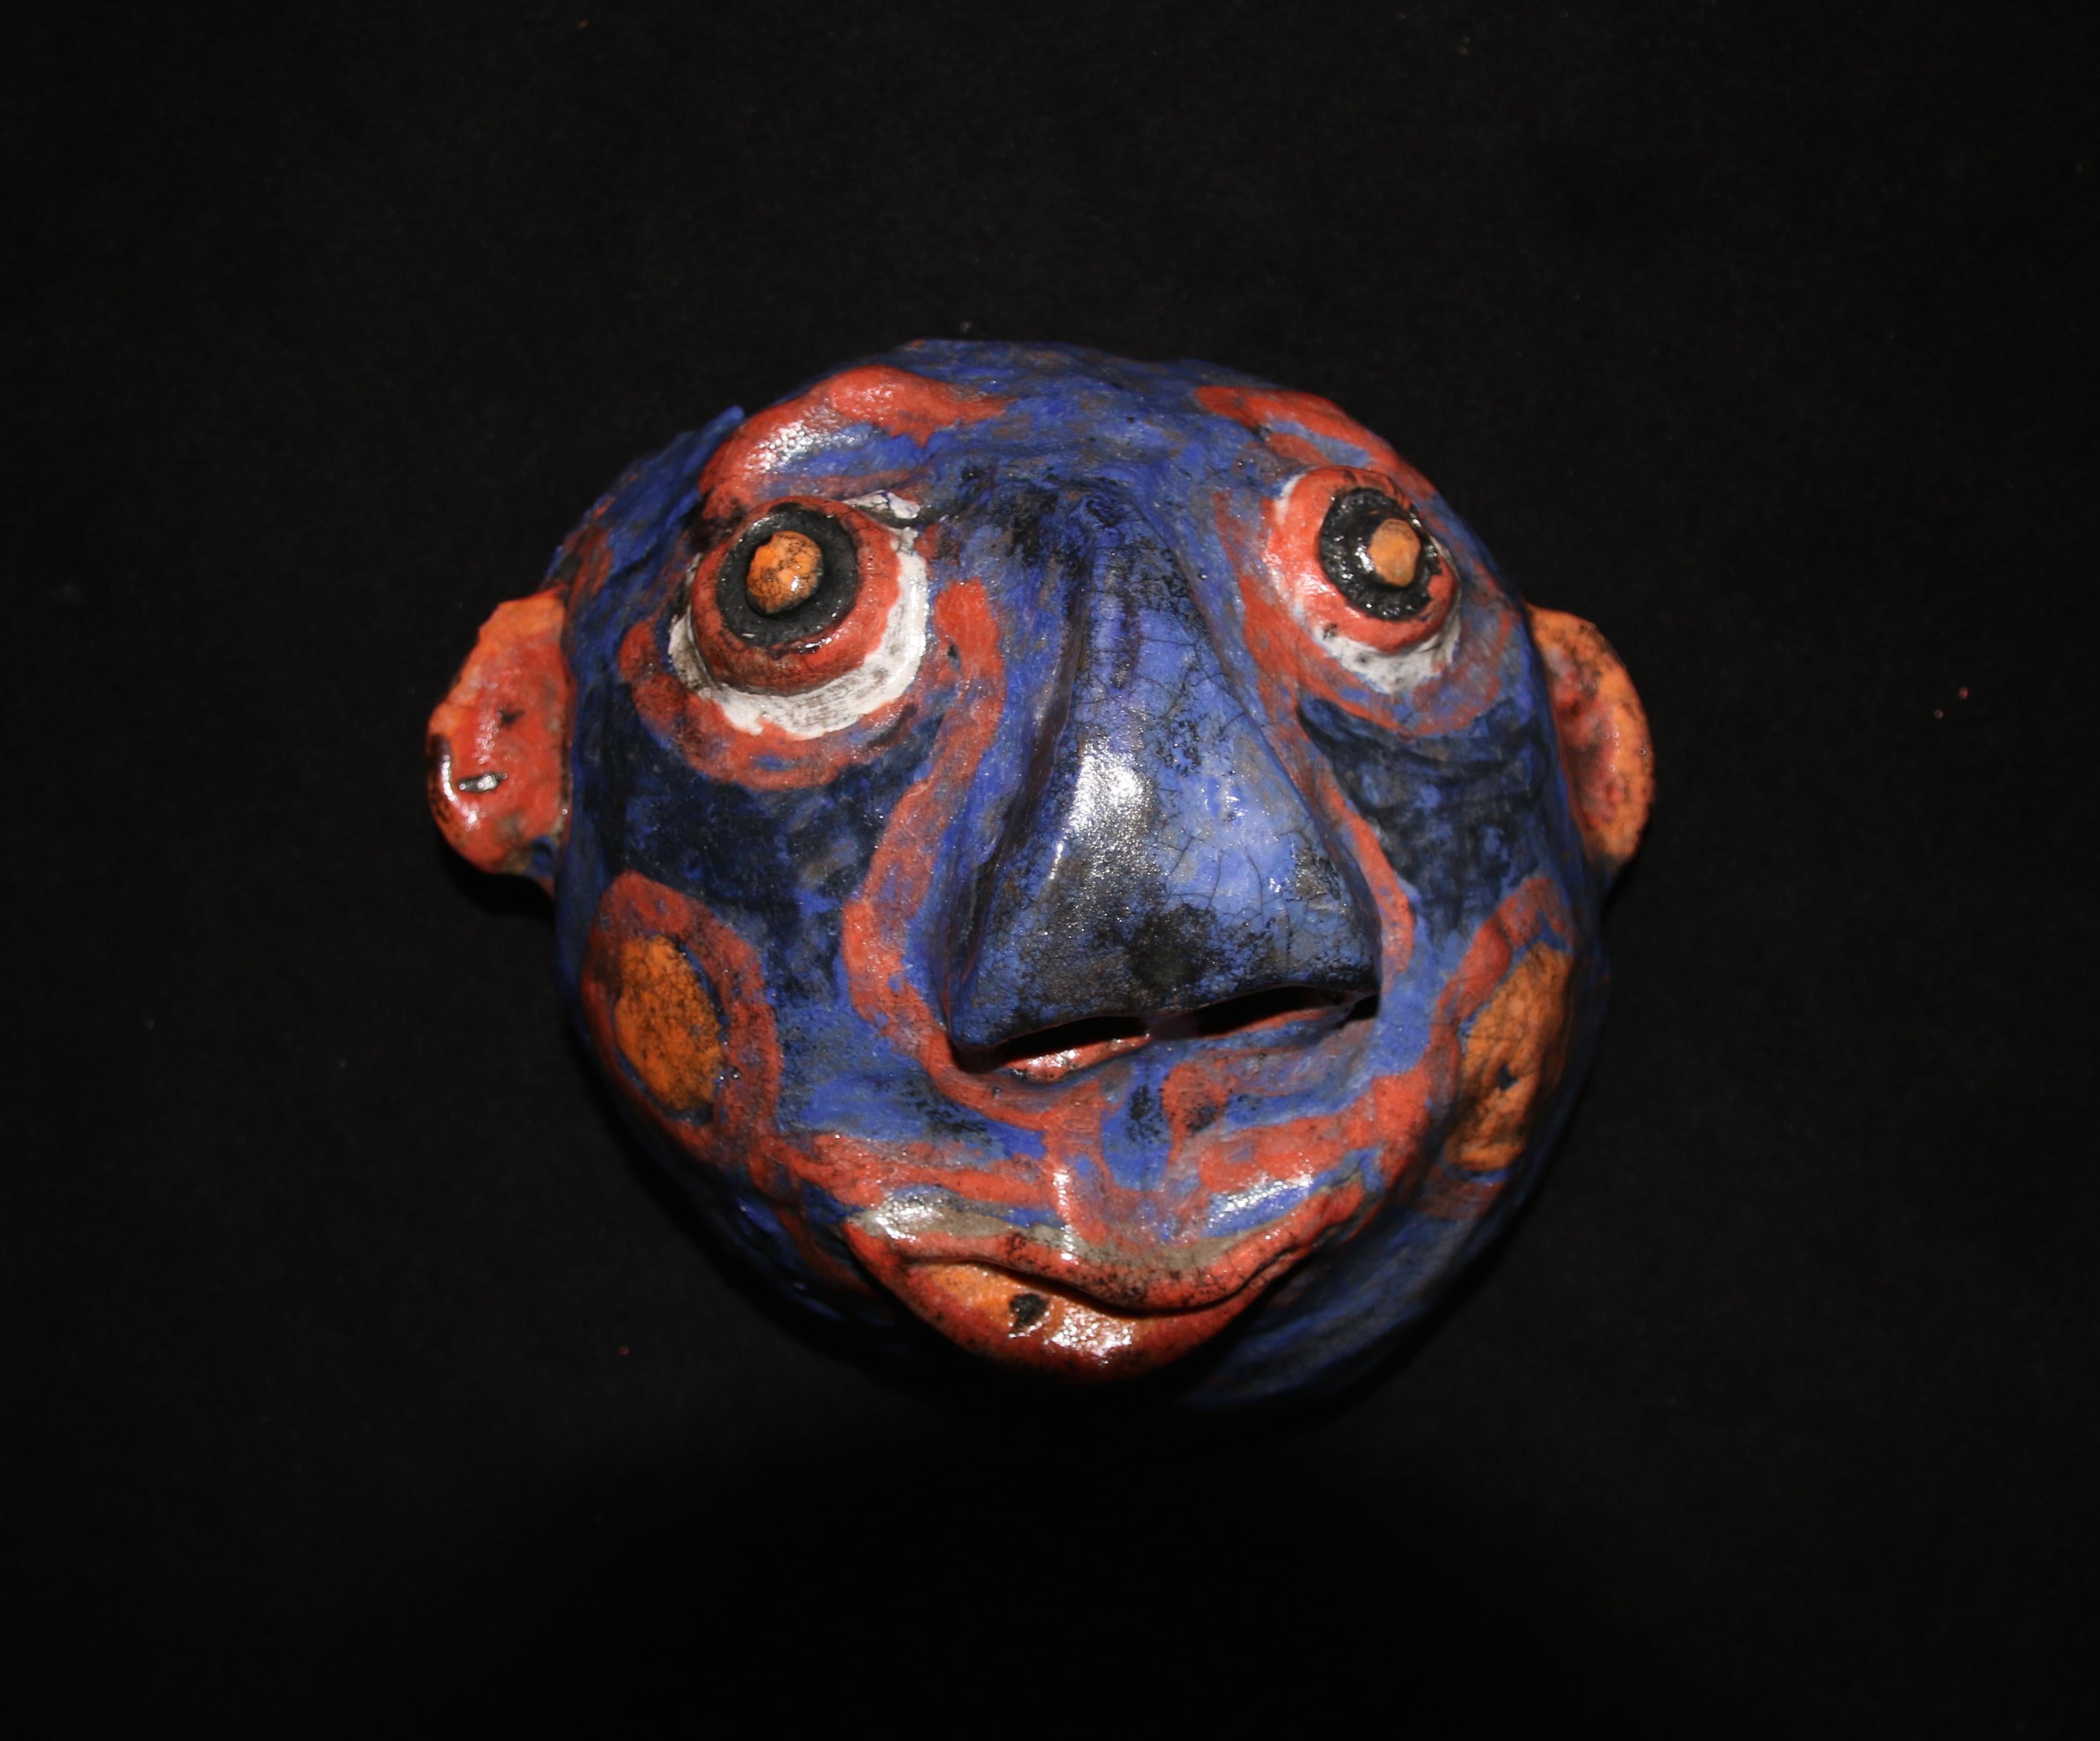 Francky Criquet. Born in 1968.
Glazed stoneware masks. Human and animal faces. Each piece is unique
Dimensions: between 25 and 35 cm.